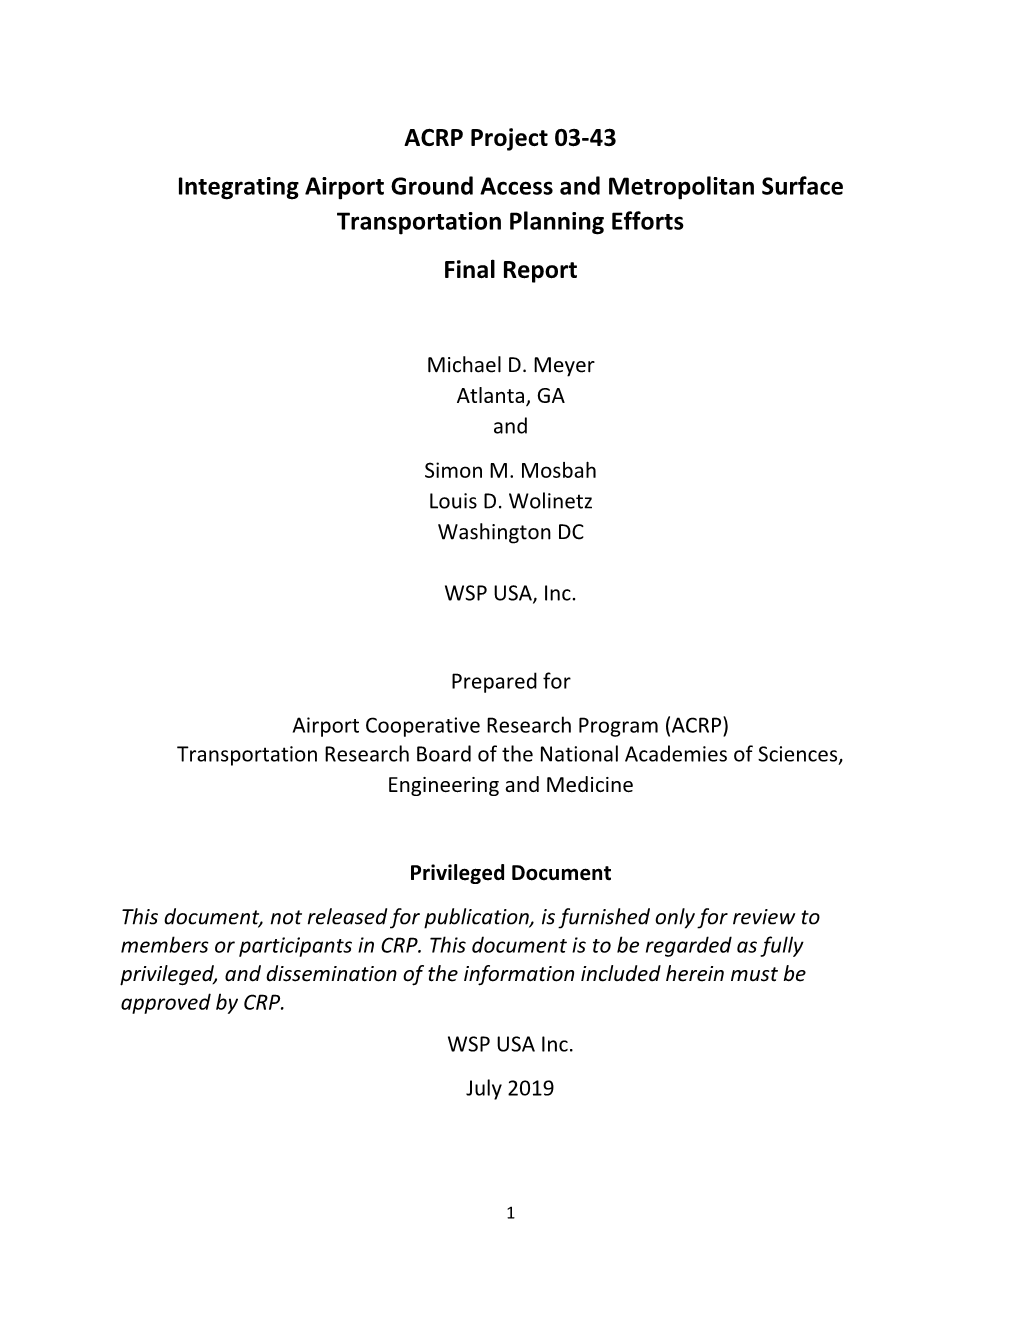 ACRP Project 03-43 Integrating Airport Ground Access and Metropolitan Surface Transportation Planning Efforts Final Report